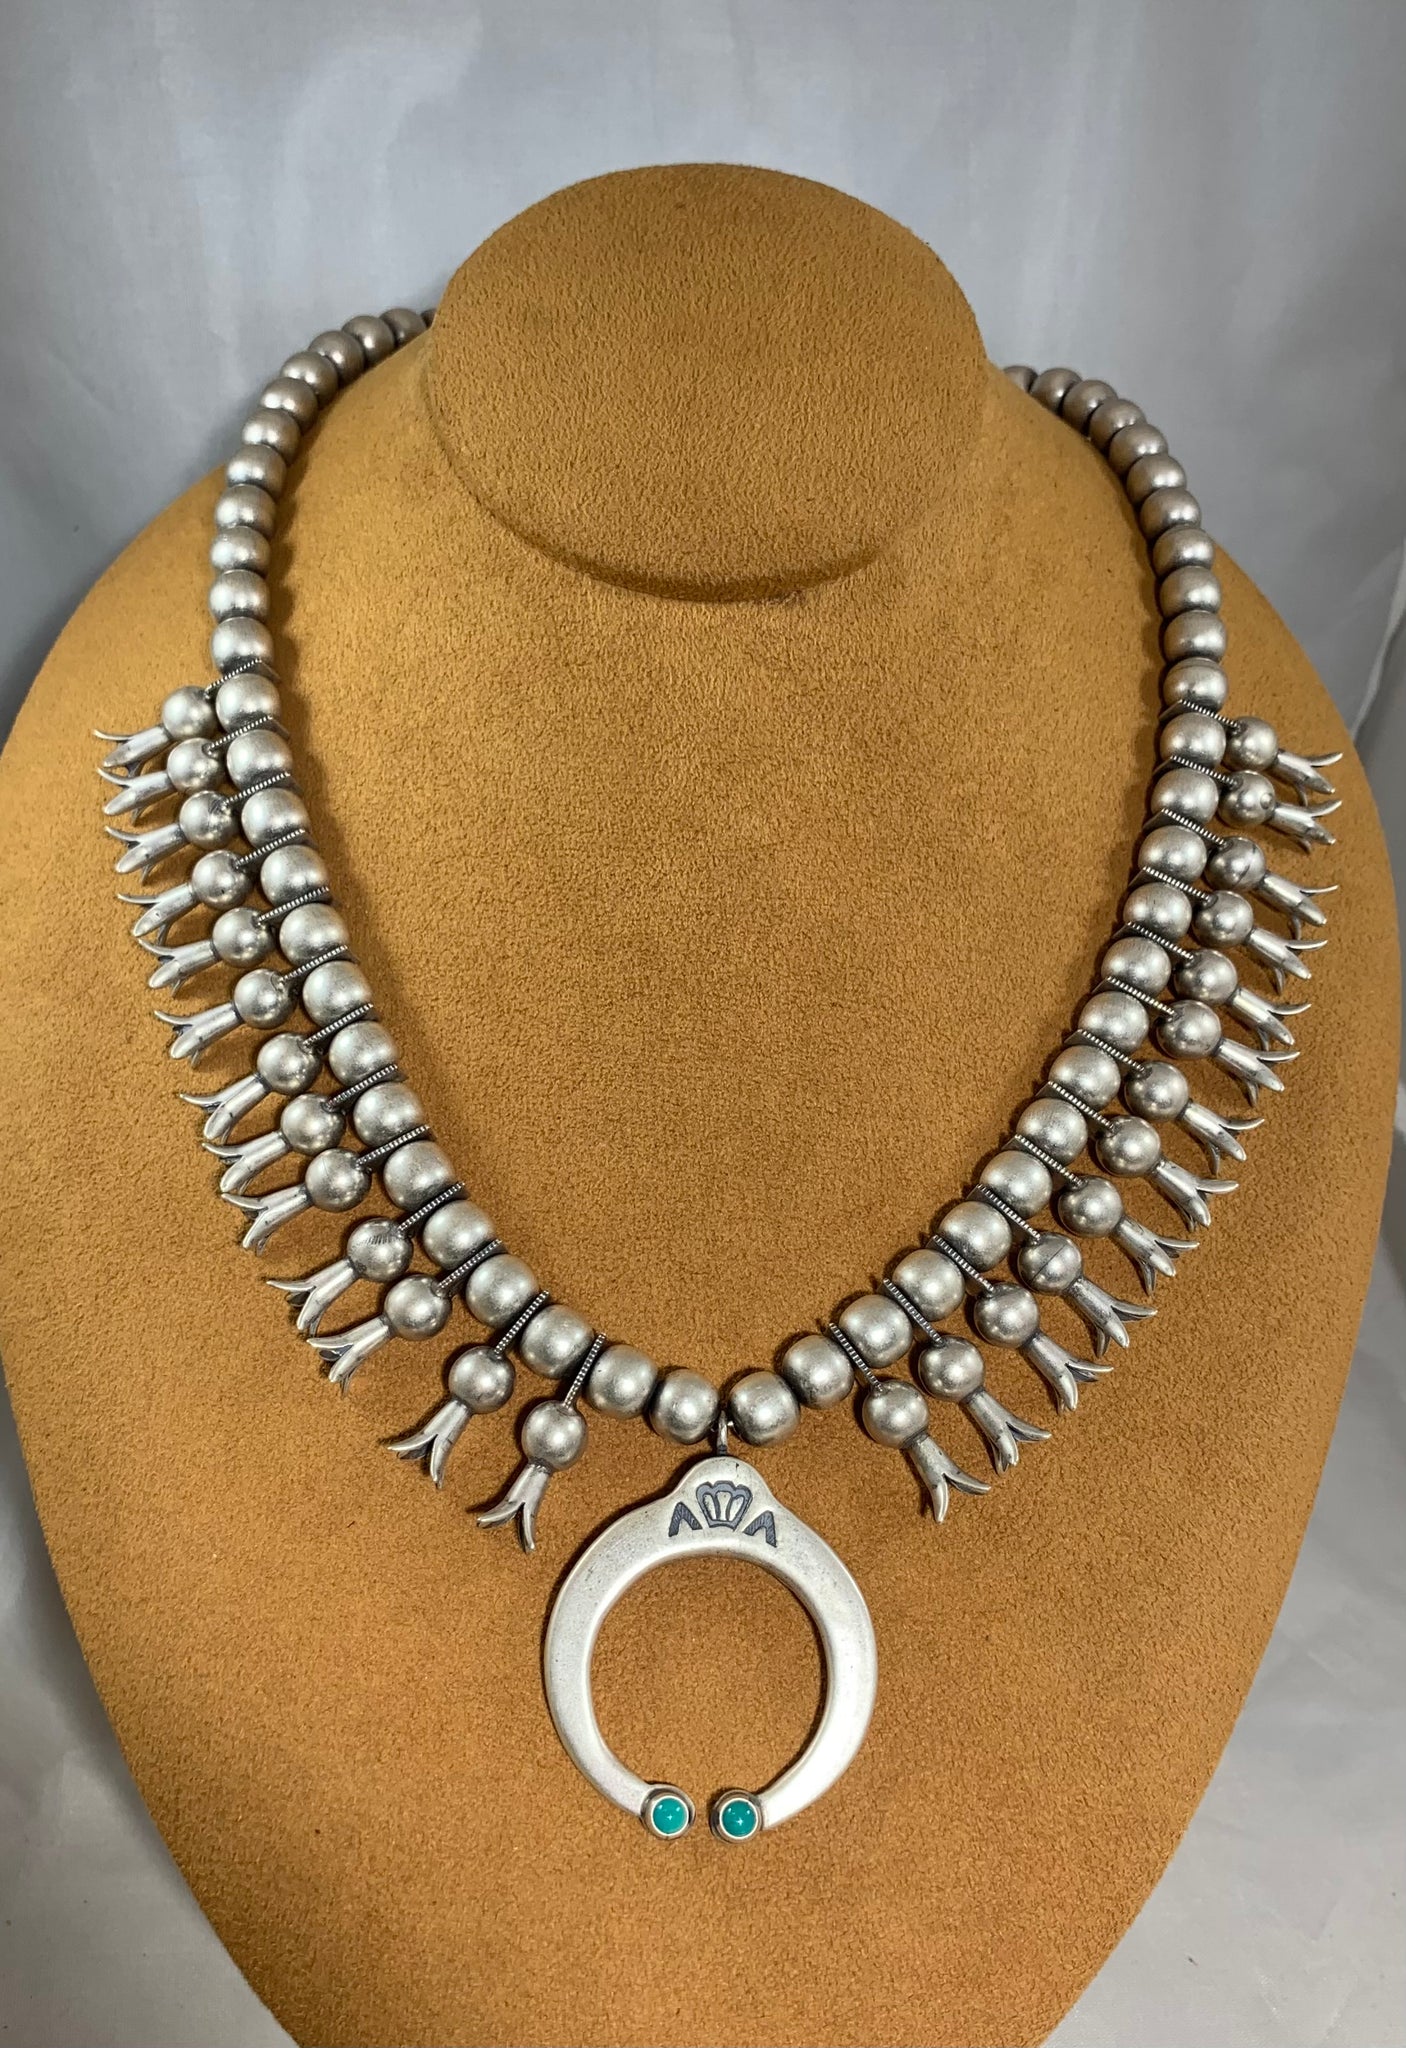 Sterling Silver Squash Blossom Necklace by Don Lucas